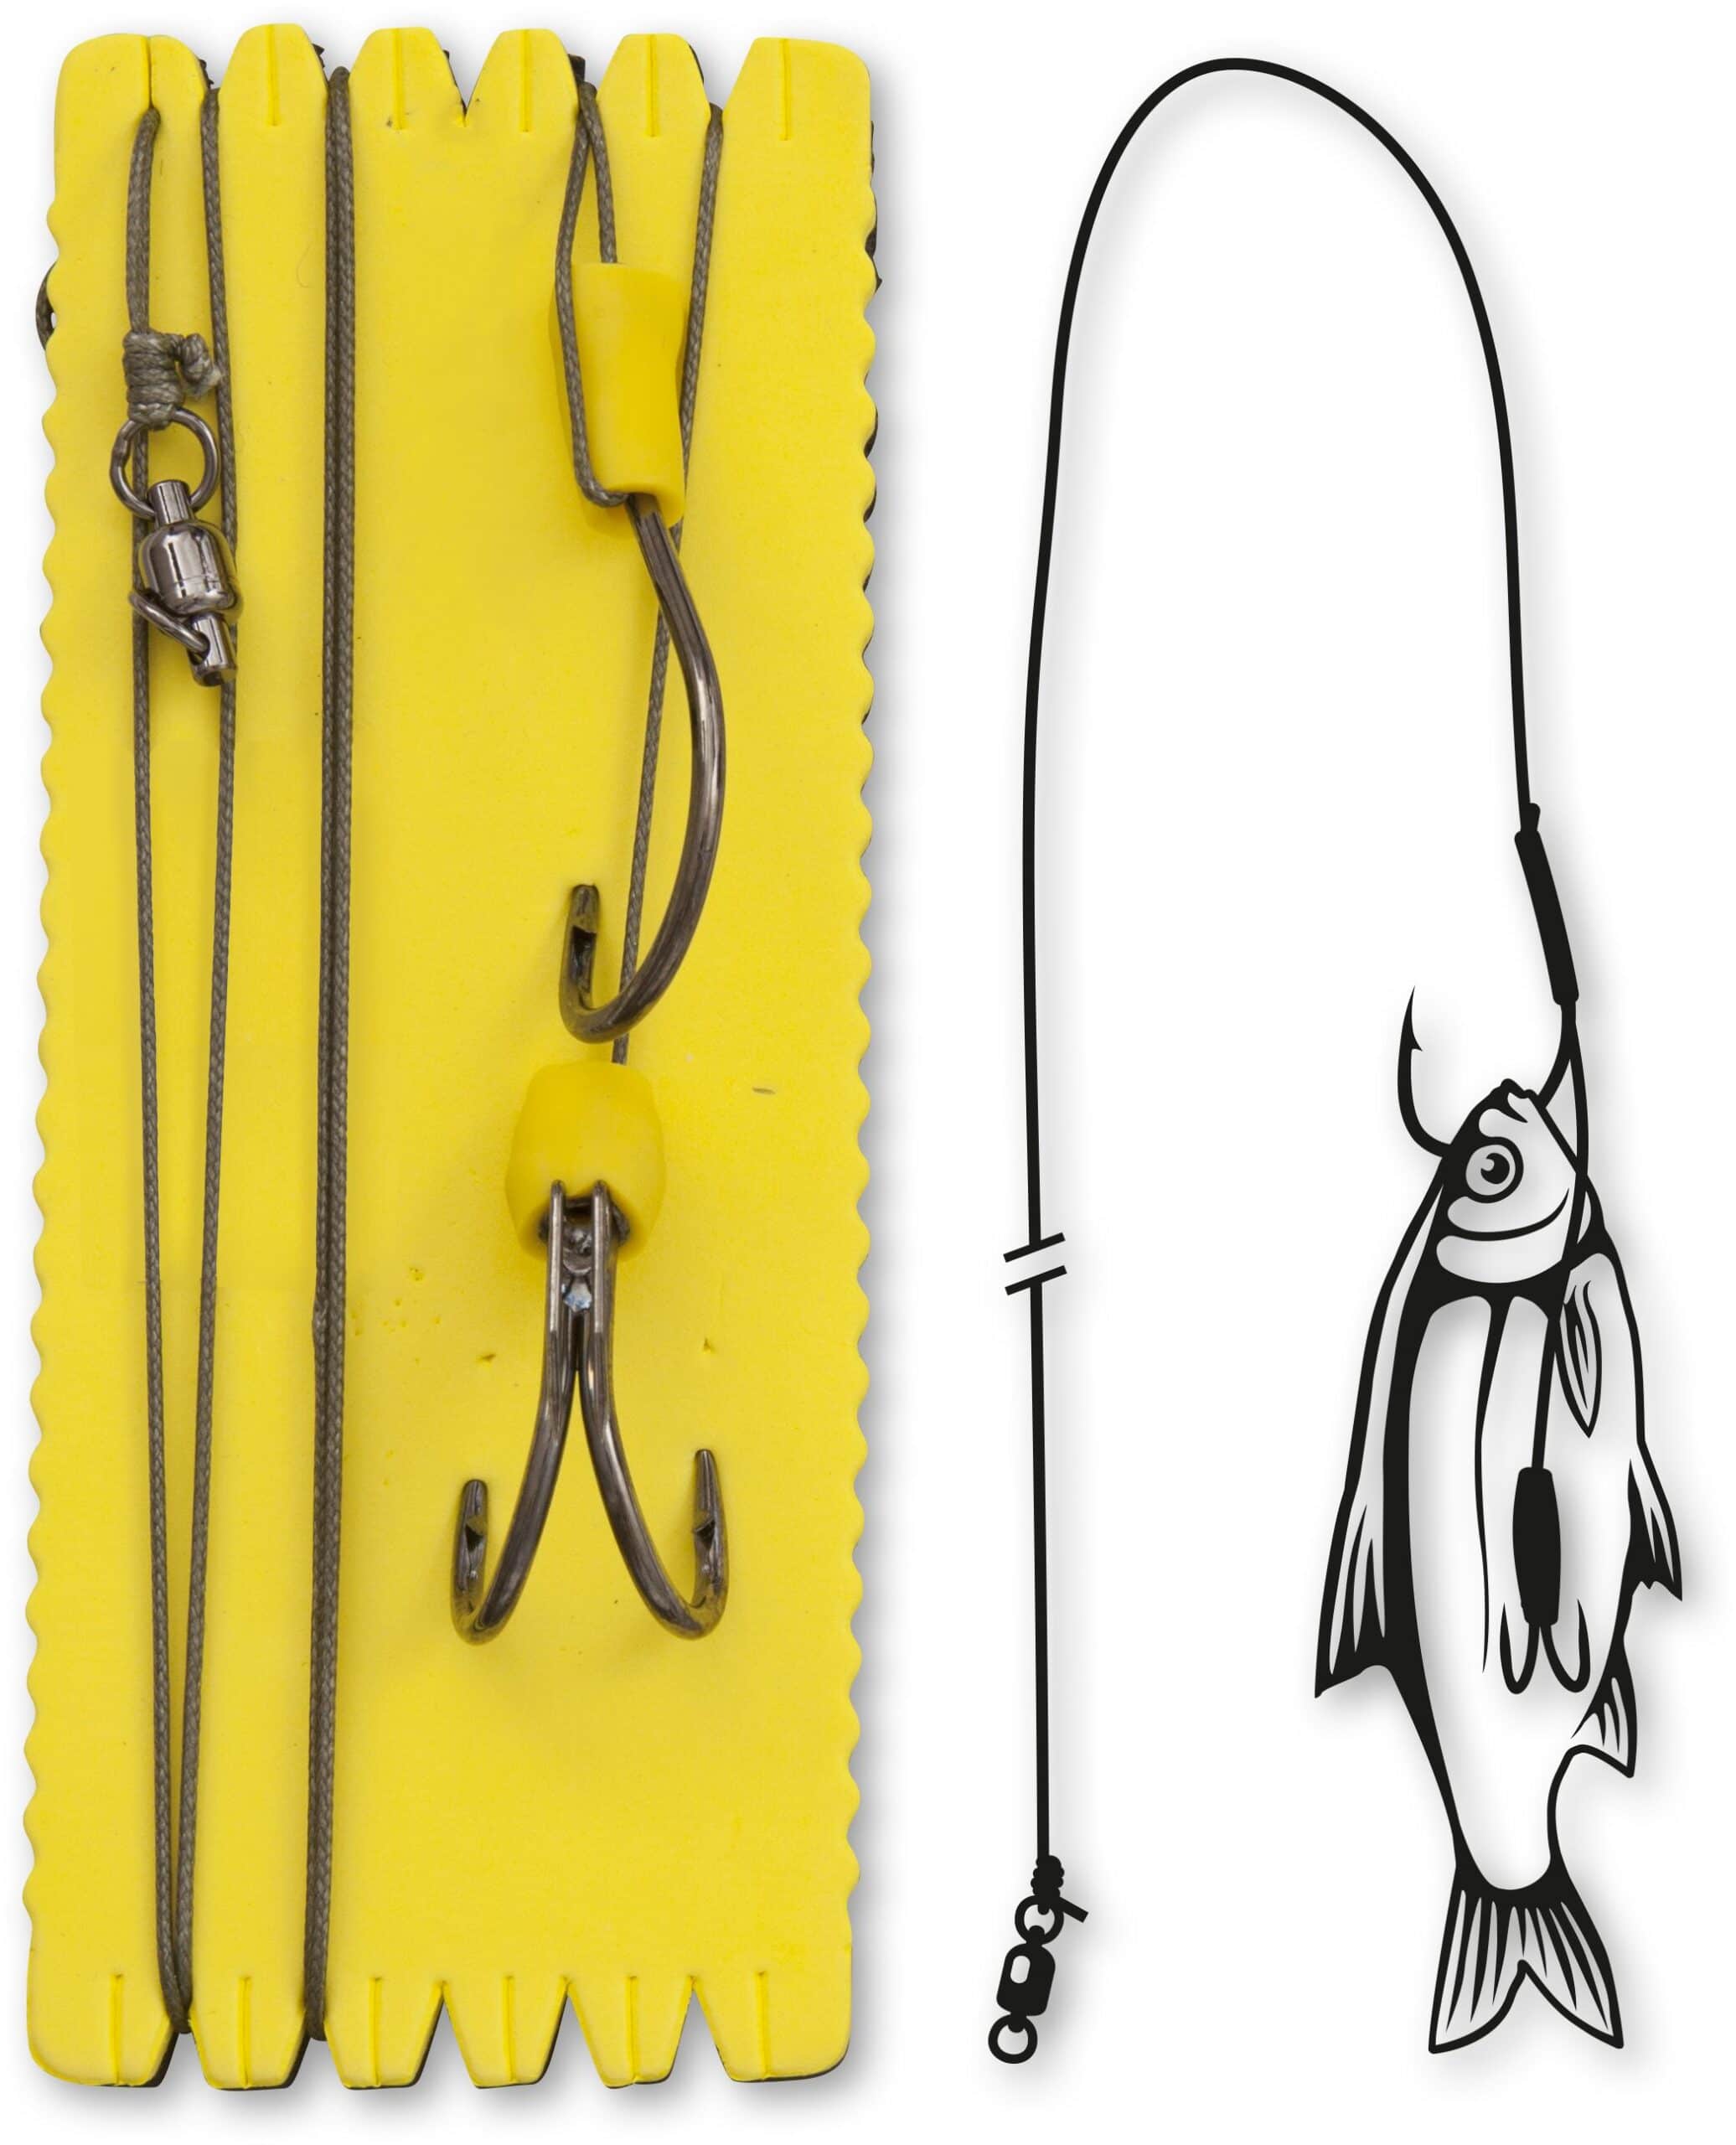 Black Cat Bouy and Boat Ghost dubbele haak Rig L